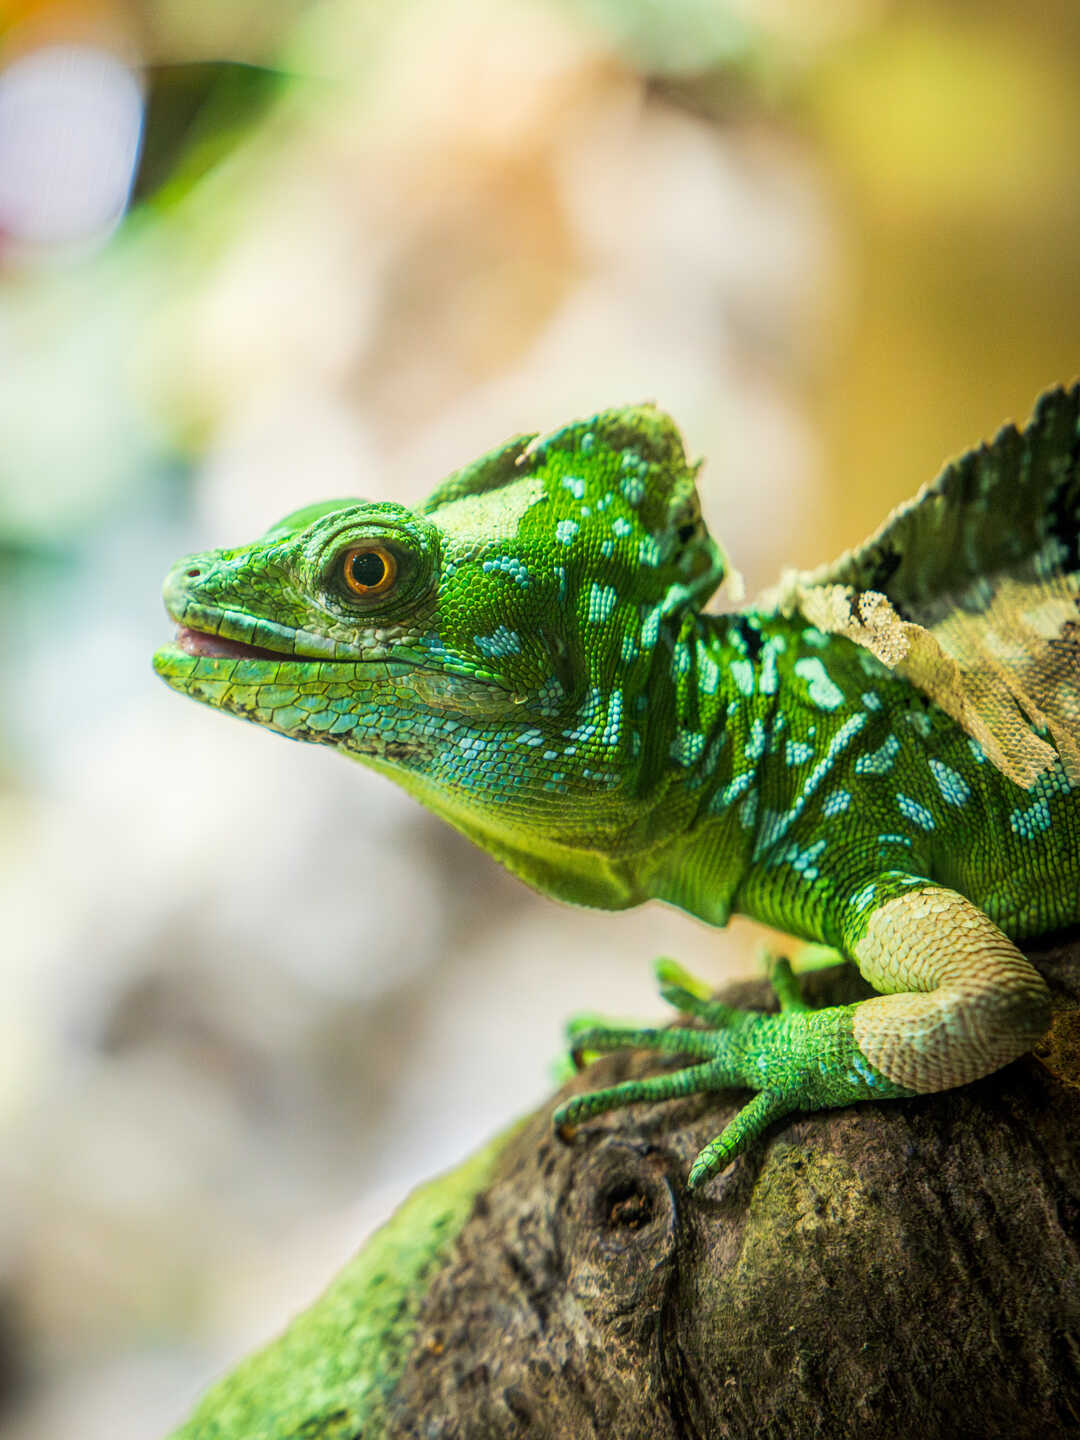 A green-crested basilisk in its habitat at Cal Academy. Photo by Gayle Laird